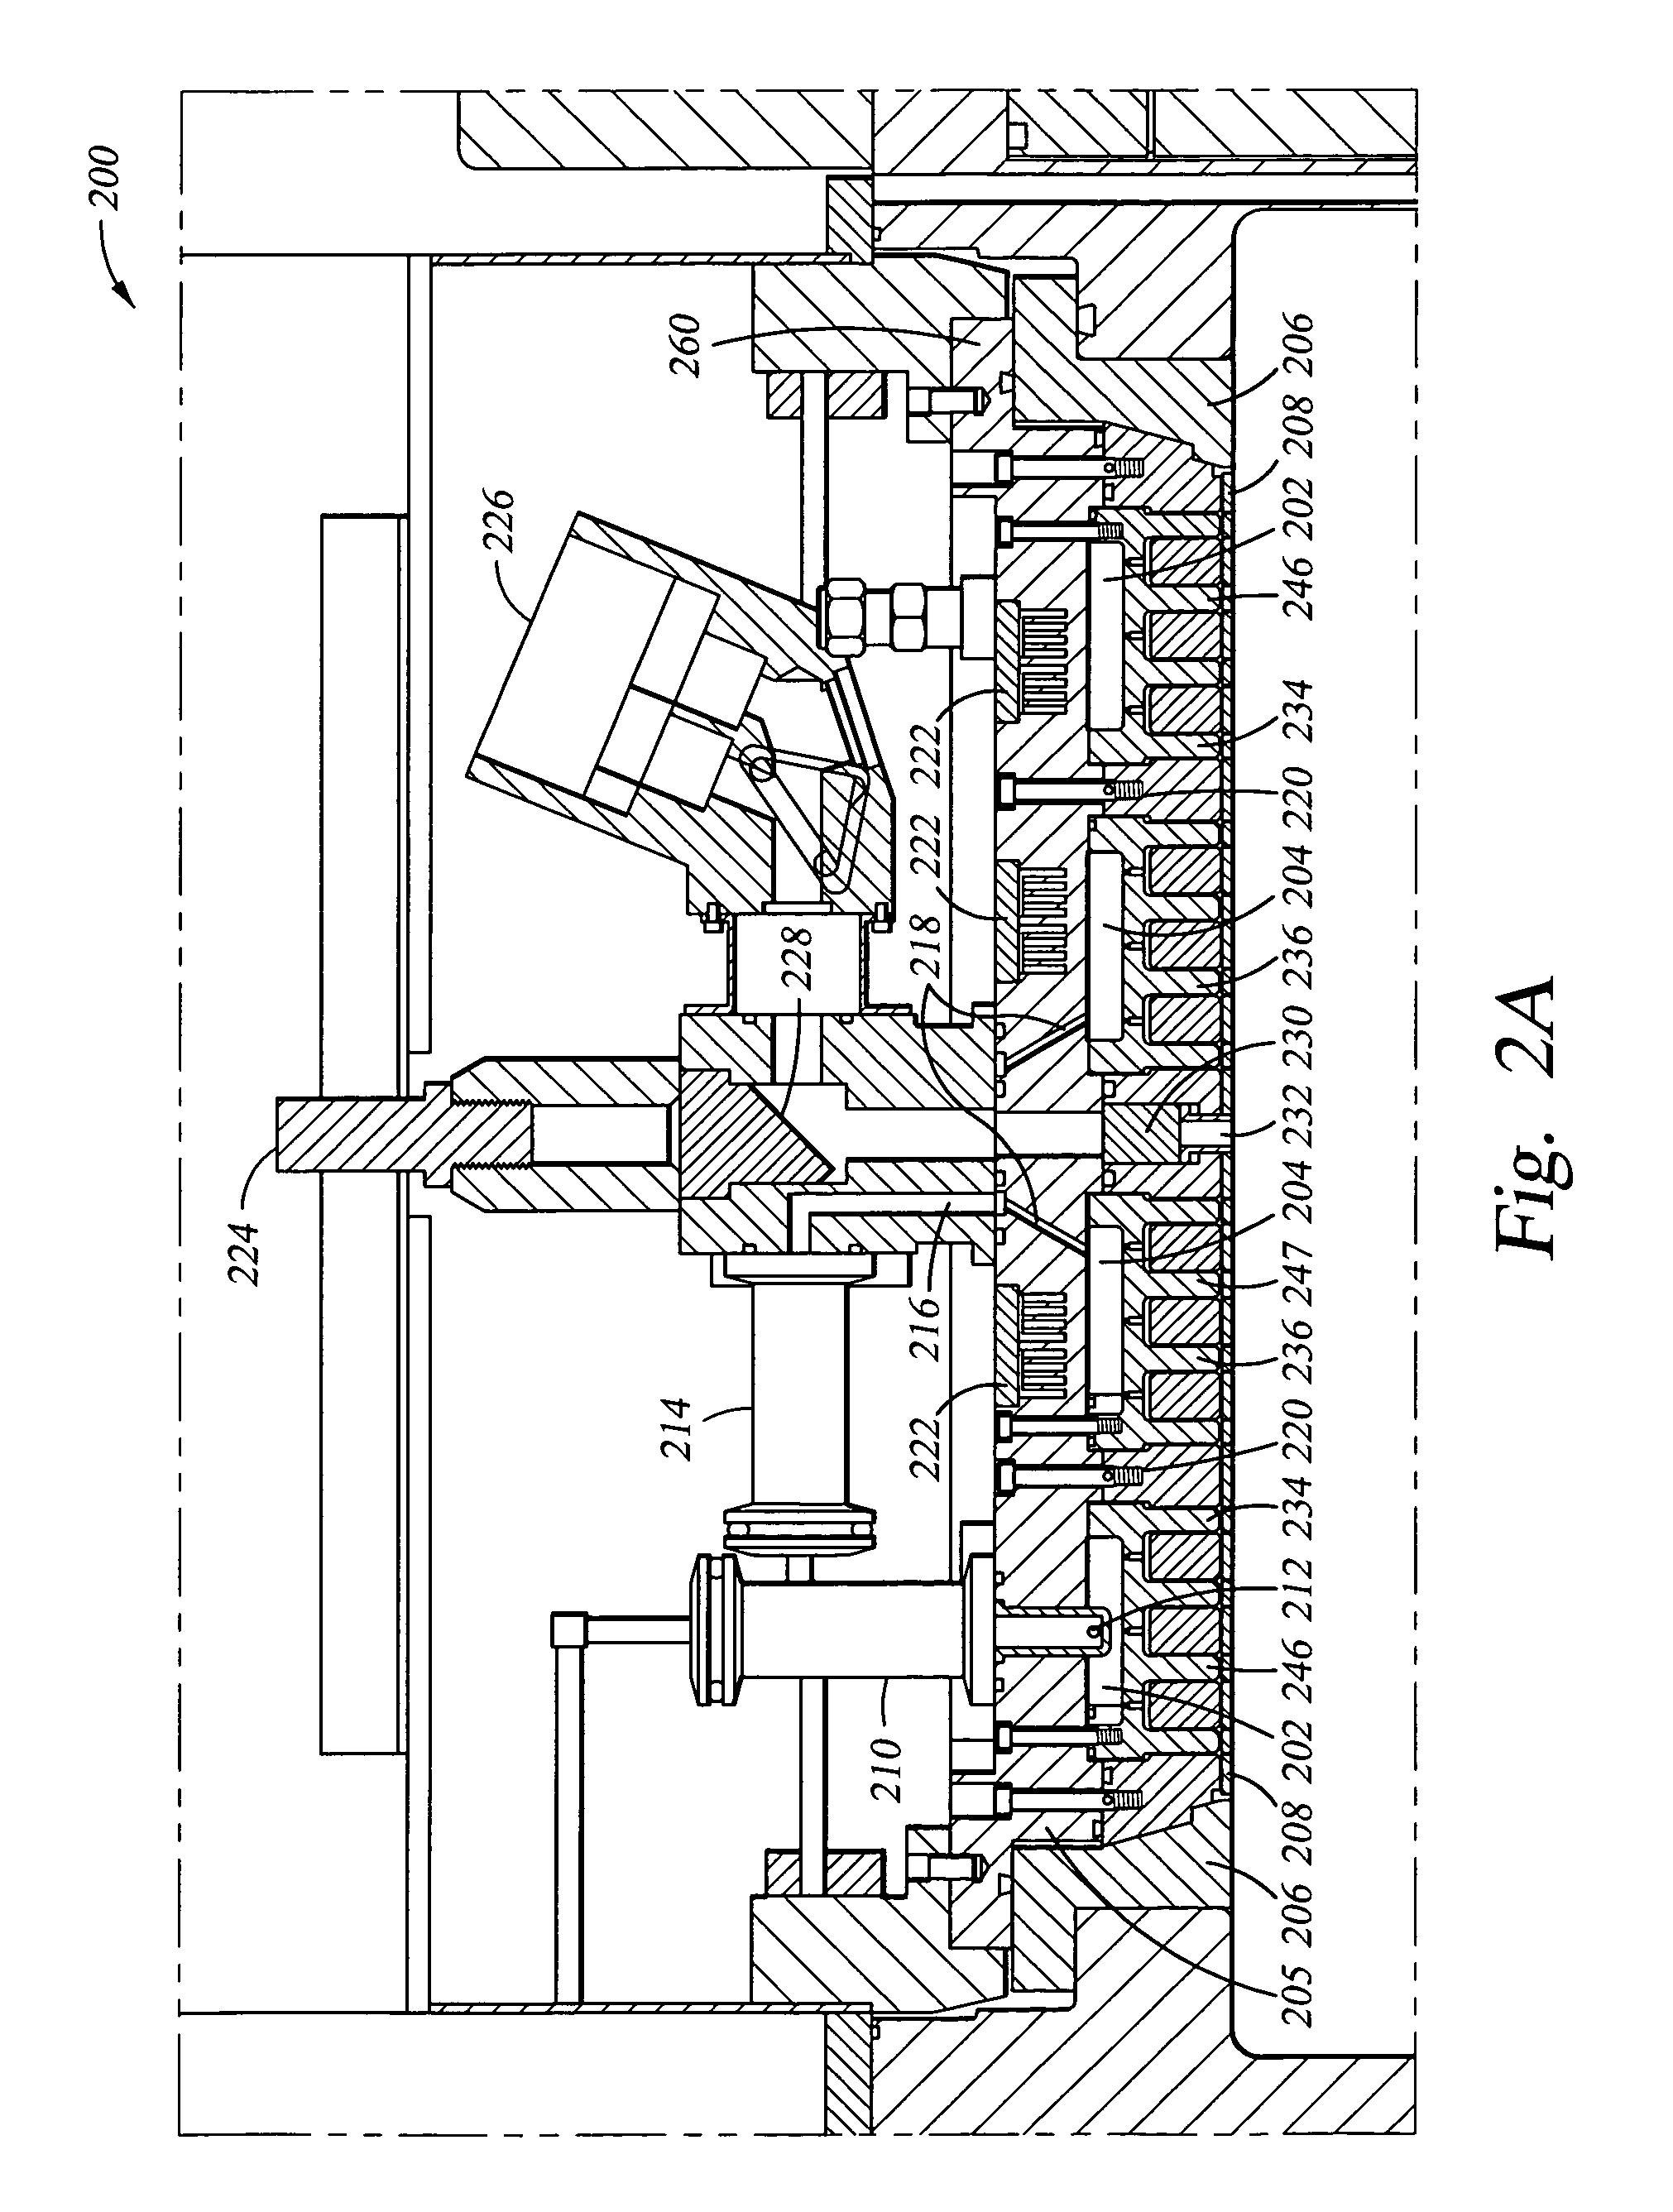 Gas distribution showerhead for semiconductor processing